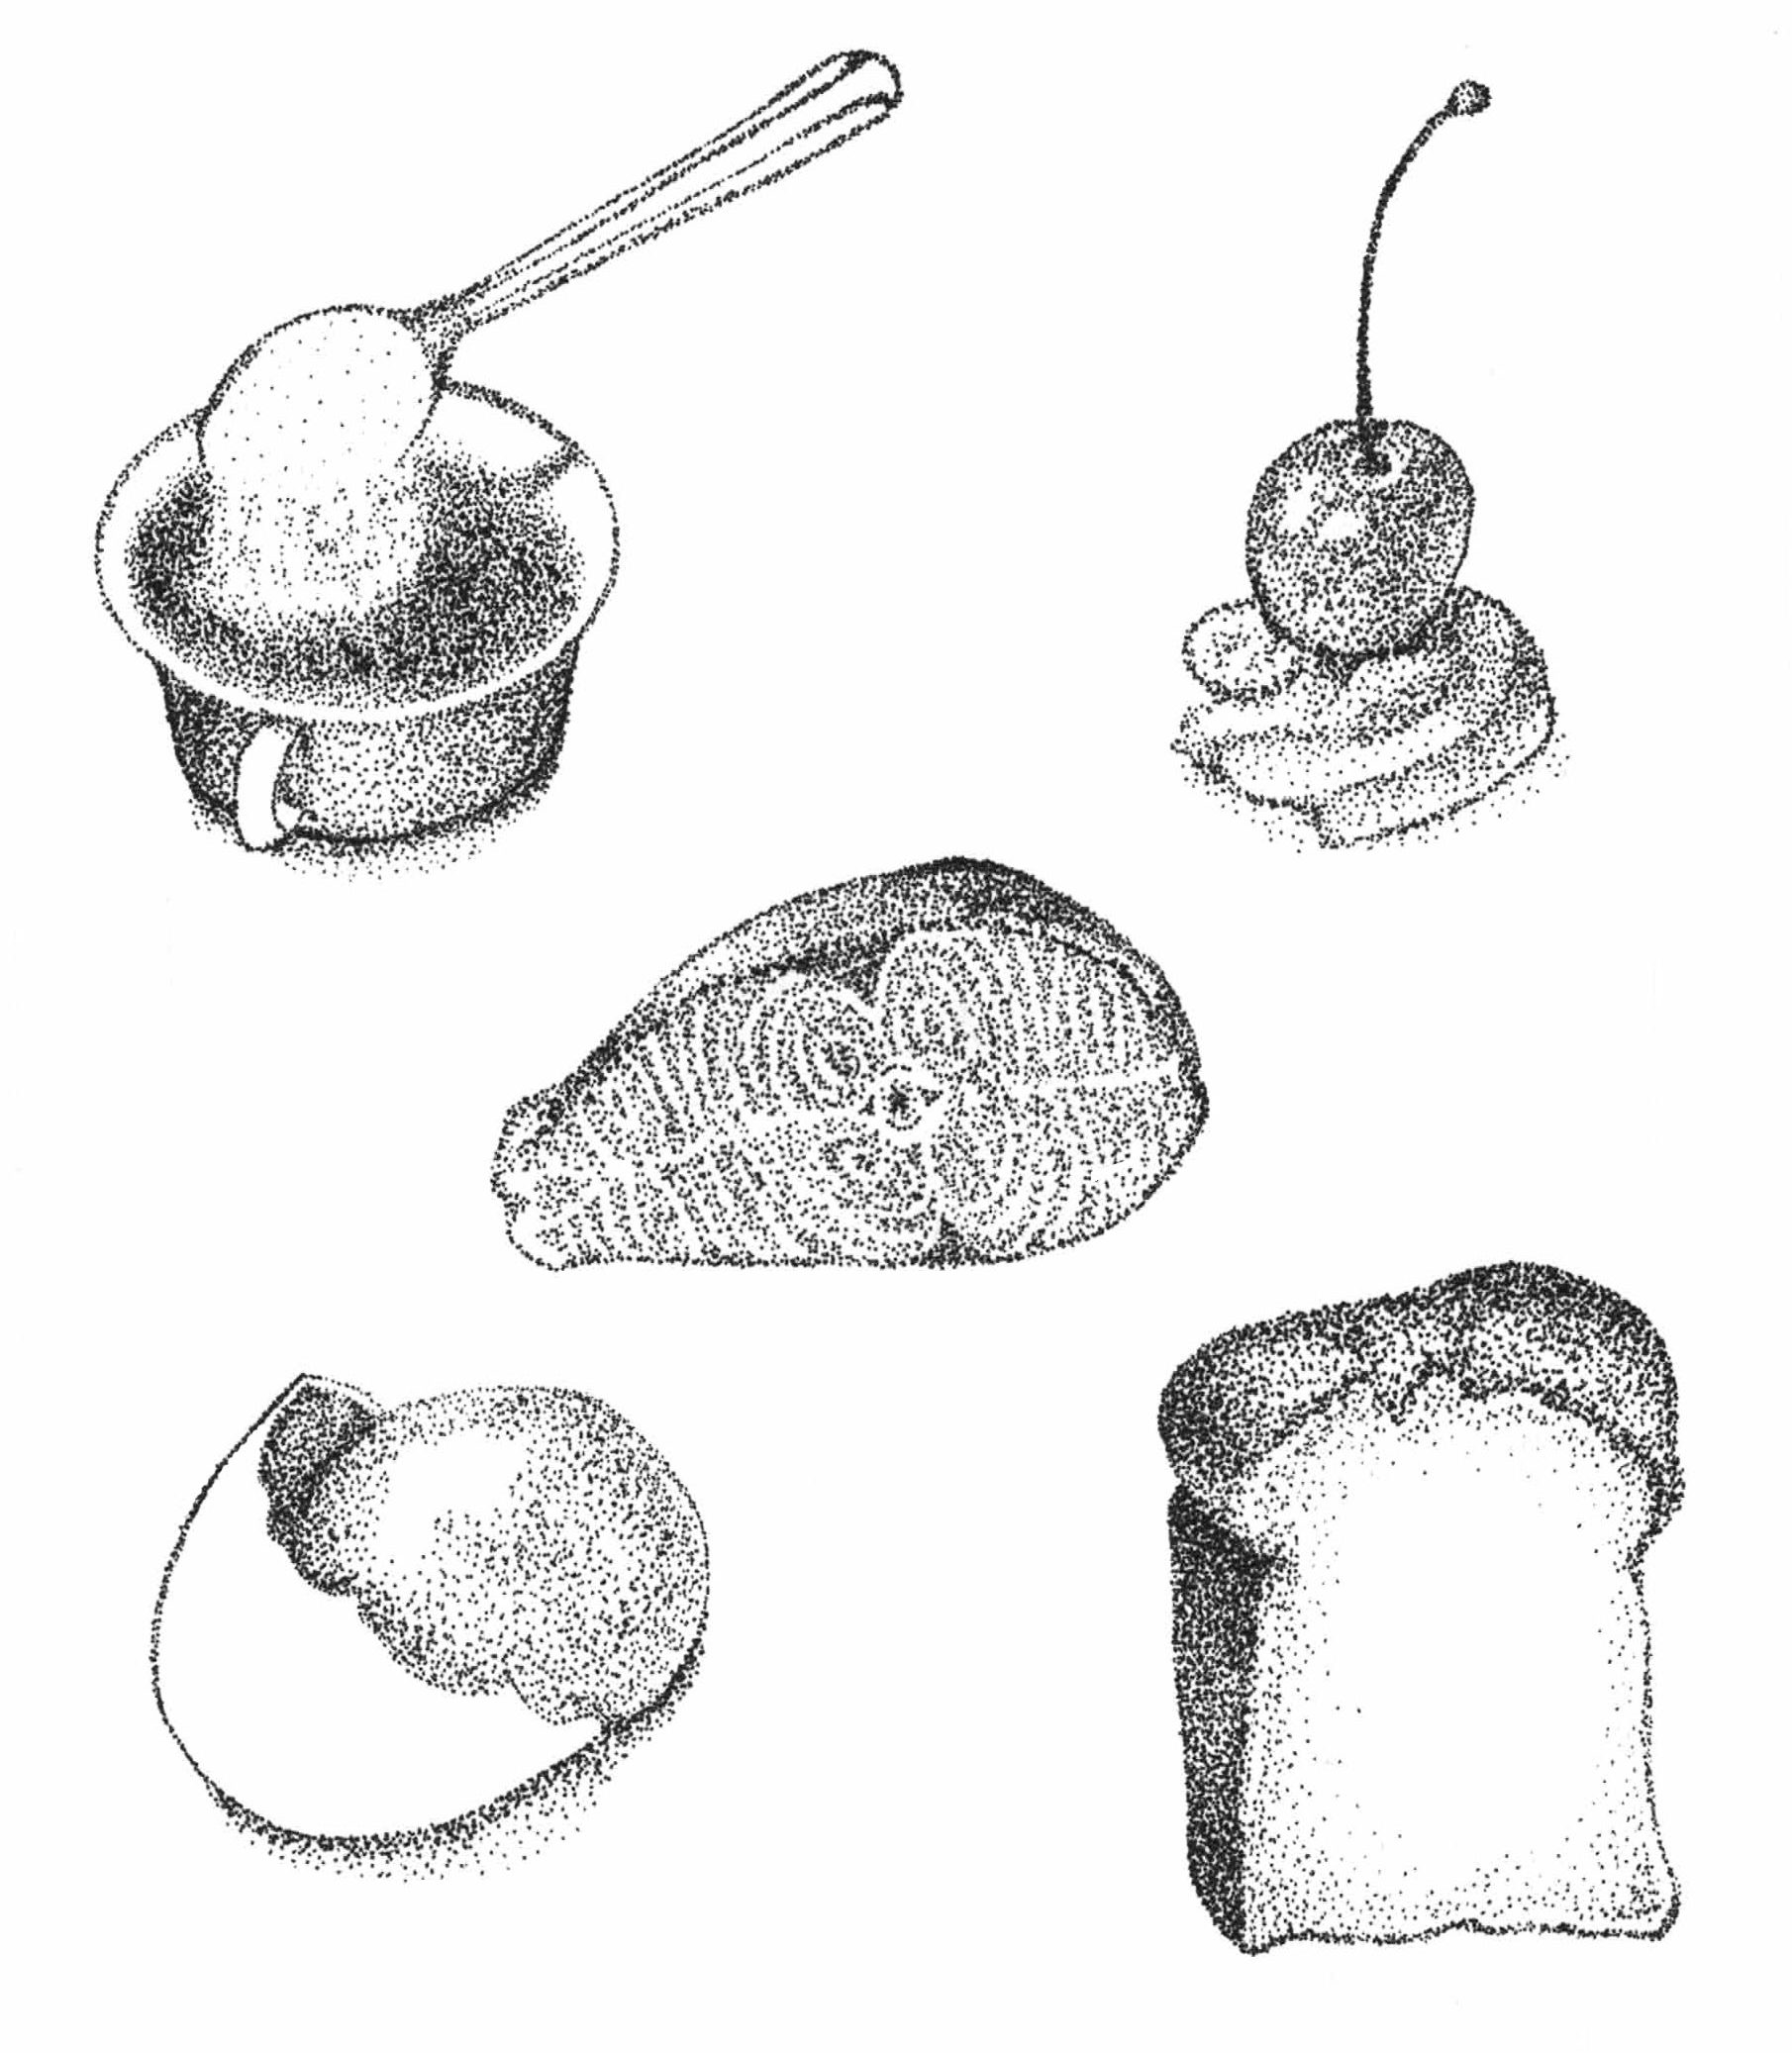 A collection of black and white tattoo sketches drawn using small dots instead of lines. A small tea cup full of tea with a teaspoon dumping sugar into the cup is in the upper right corner. A stemmed cherry sitting on top of a pile of whipped cream is in the upper right corner. The cross-section of a pear lying on its side is in the center. An egg yolk resting in half of a cracked egg shell is in the bottom left corner. A thick slice of bread from a sandwich loaf is standing upright in the bottom right corner. 